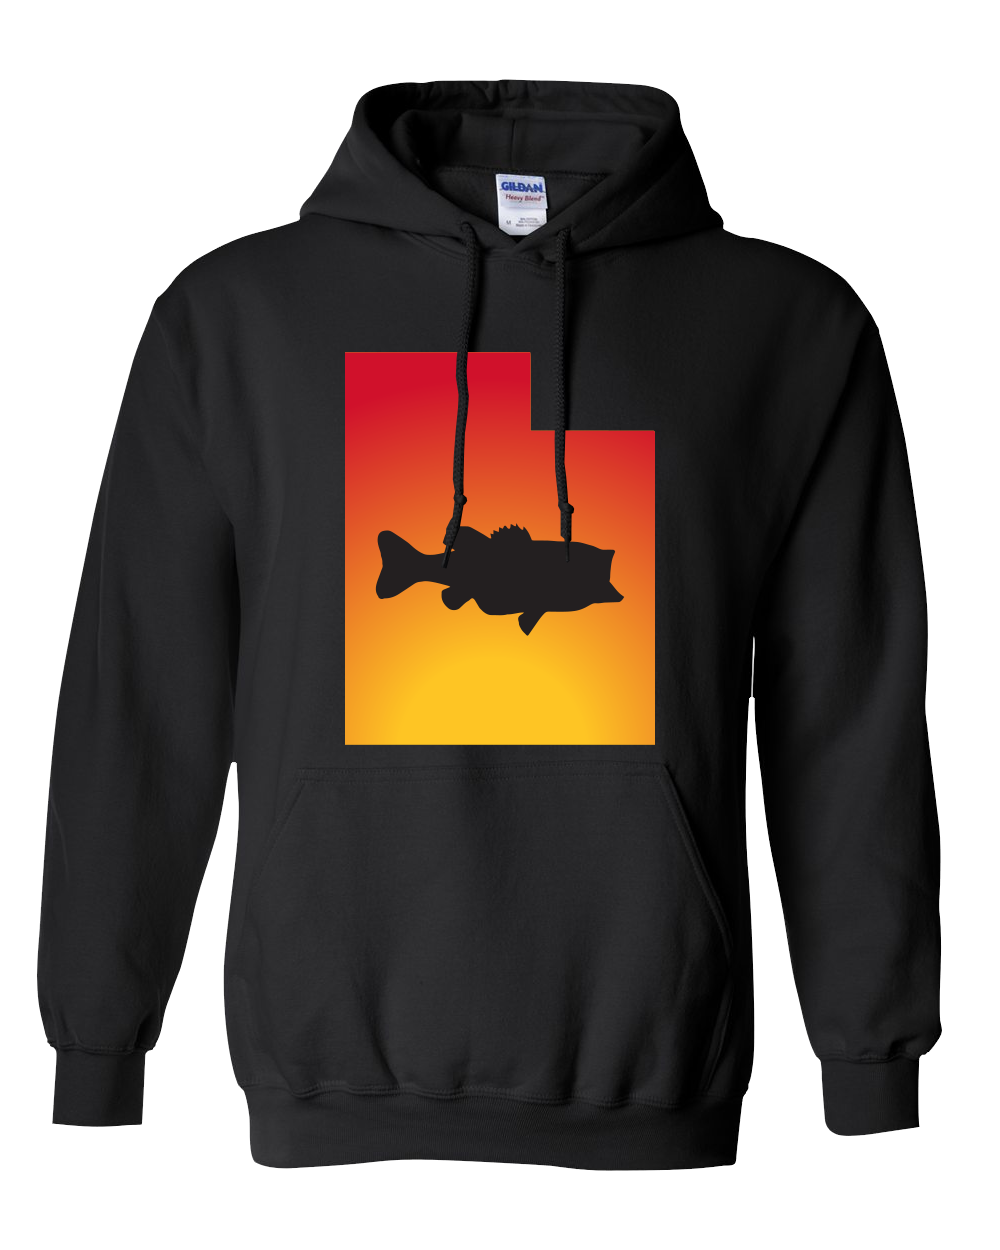 Pullover Hooded Sweatshirt Utah Black Large Mouth Bass Vibrant Design High Quality Tight Knit Ring Spun Low Maintenance Cotton Printed With The Newest Available Color Transfer Technology